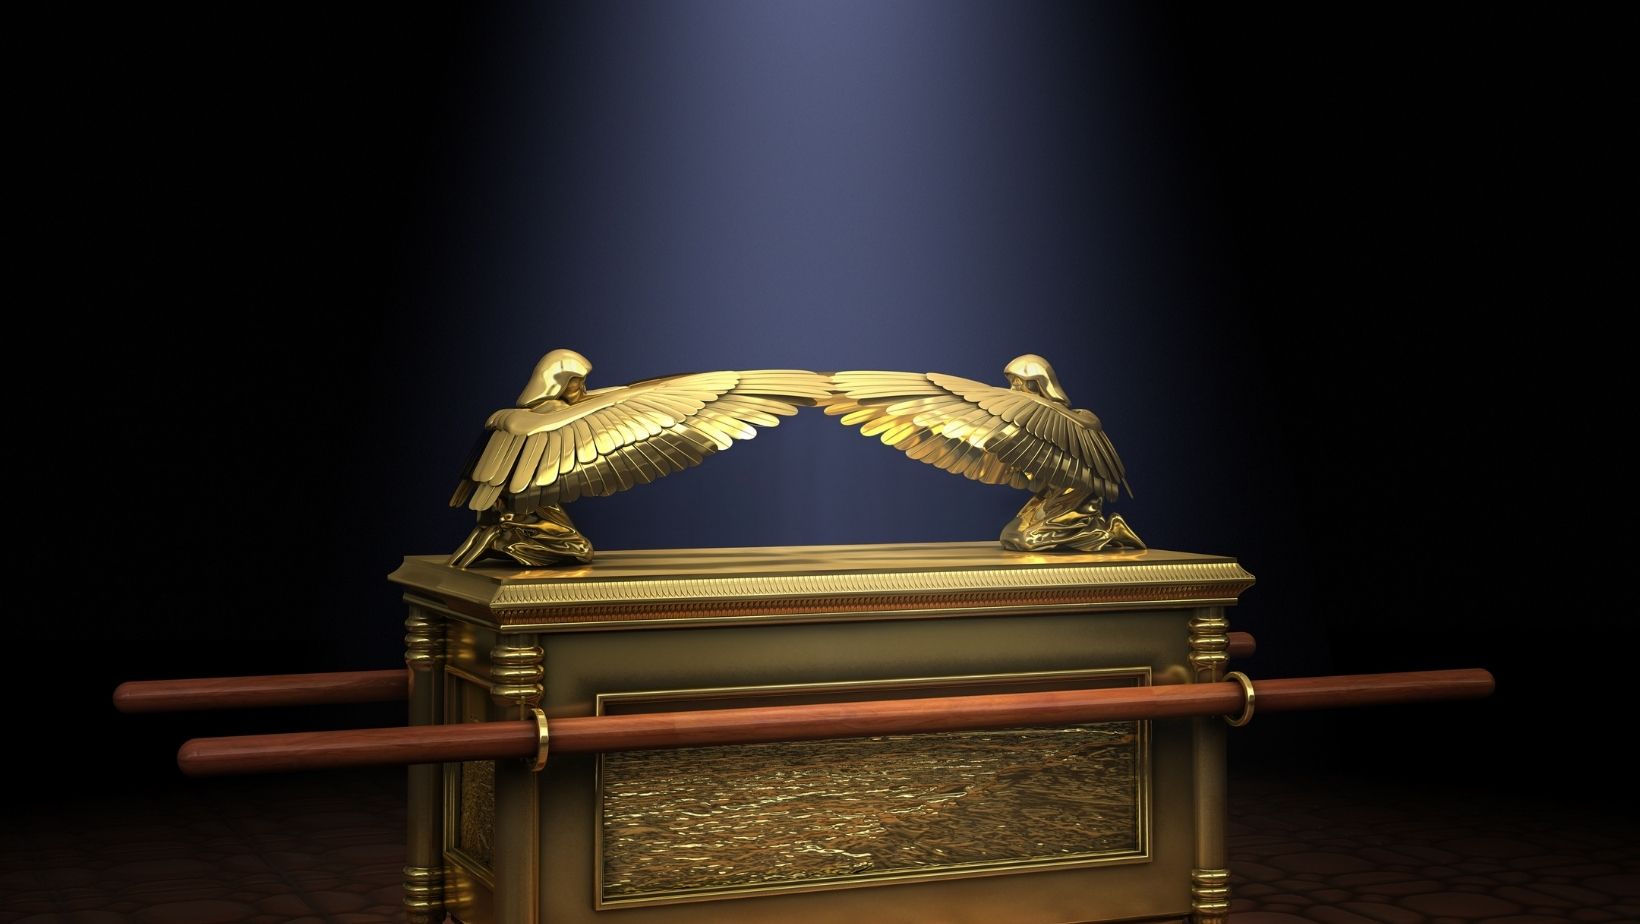 The Ark of the Covenant in the Temple and the Four Faces of the Living Creatures